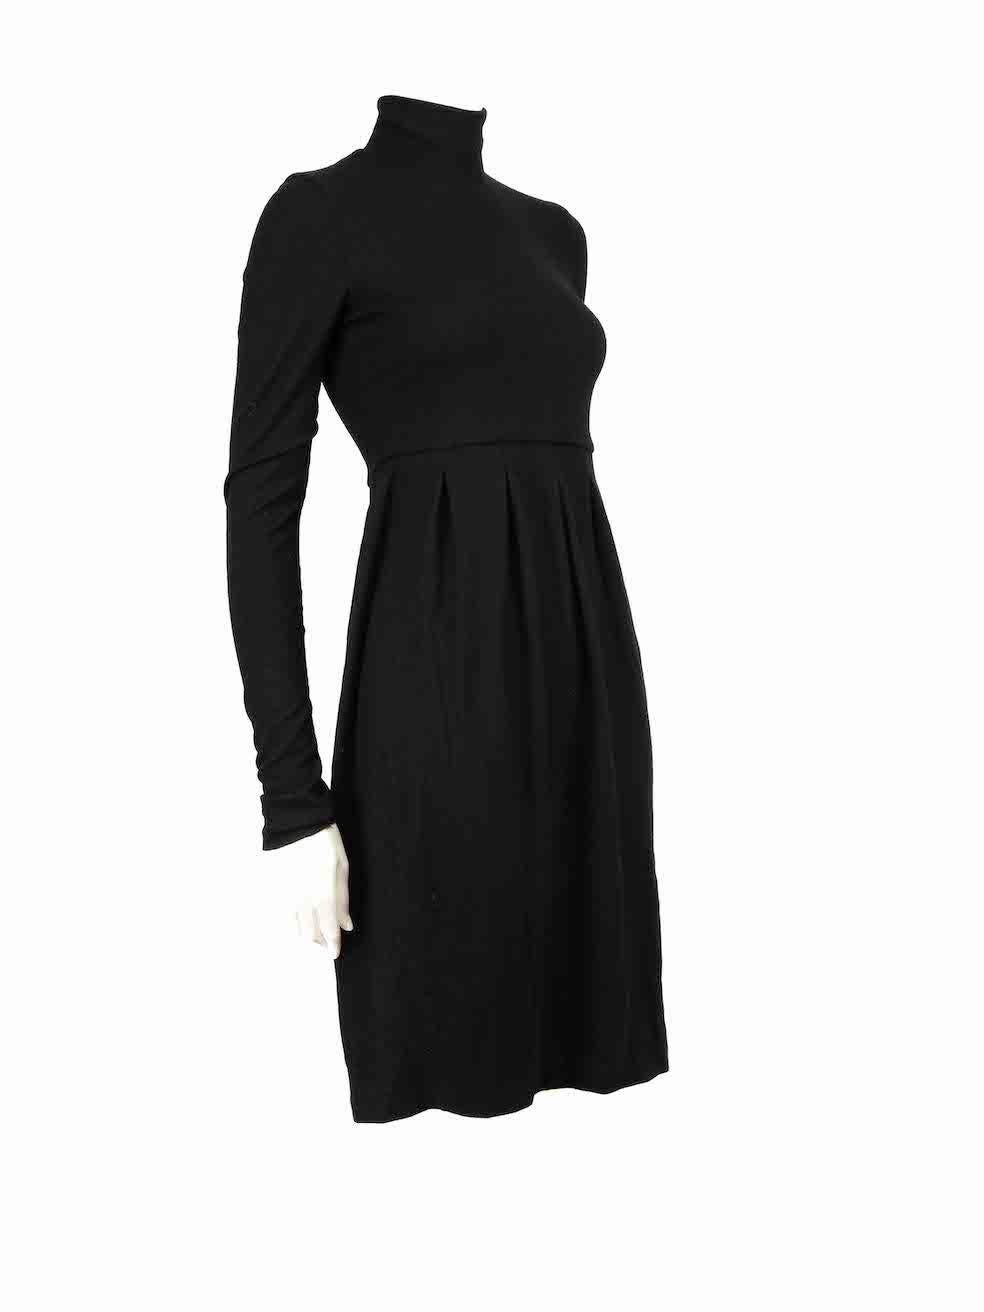 CONDITION is Very good. Hardly any visible wear to dress is evident on this used Jil Sander designer resale item.
 
 
 
 Details
 
 
 Black
 
 Wool
 
 Dress
 
 Knee length
 
 Turtleneck
 
 Long sleeves
 
 Pleated skirt
 
 Back zip fastening
 
 
 
 
